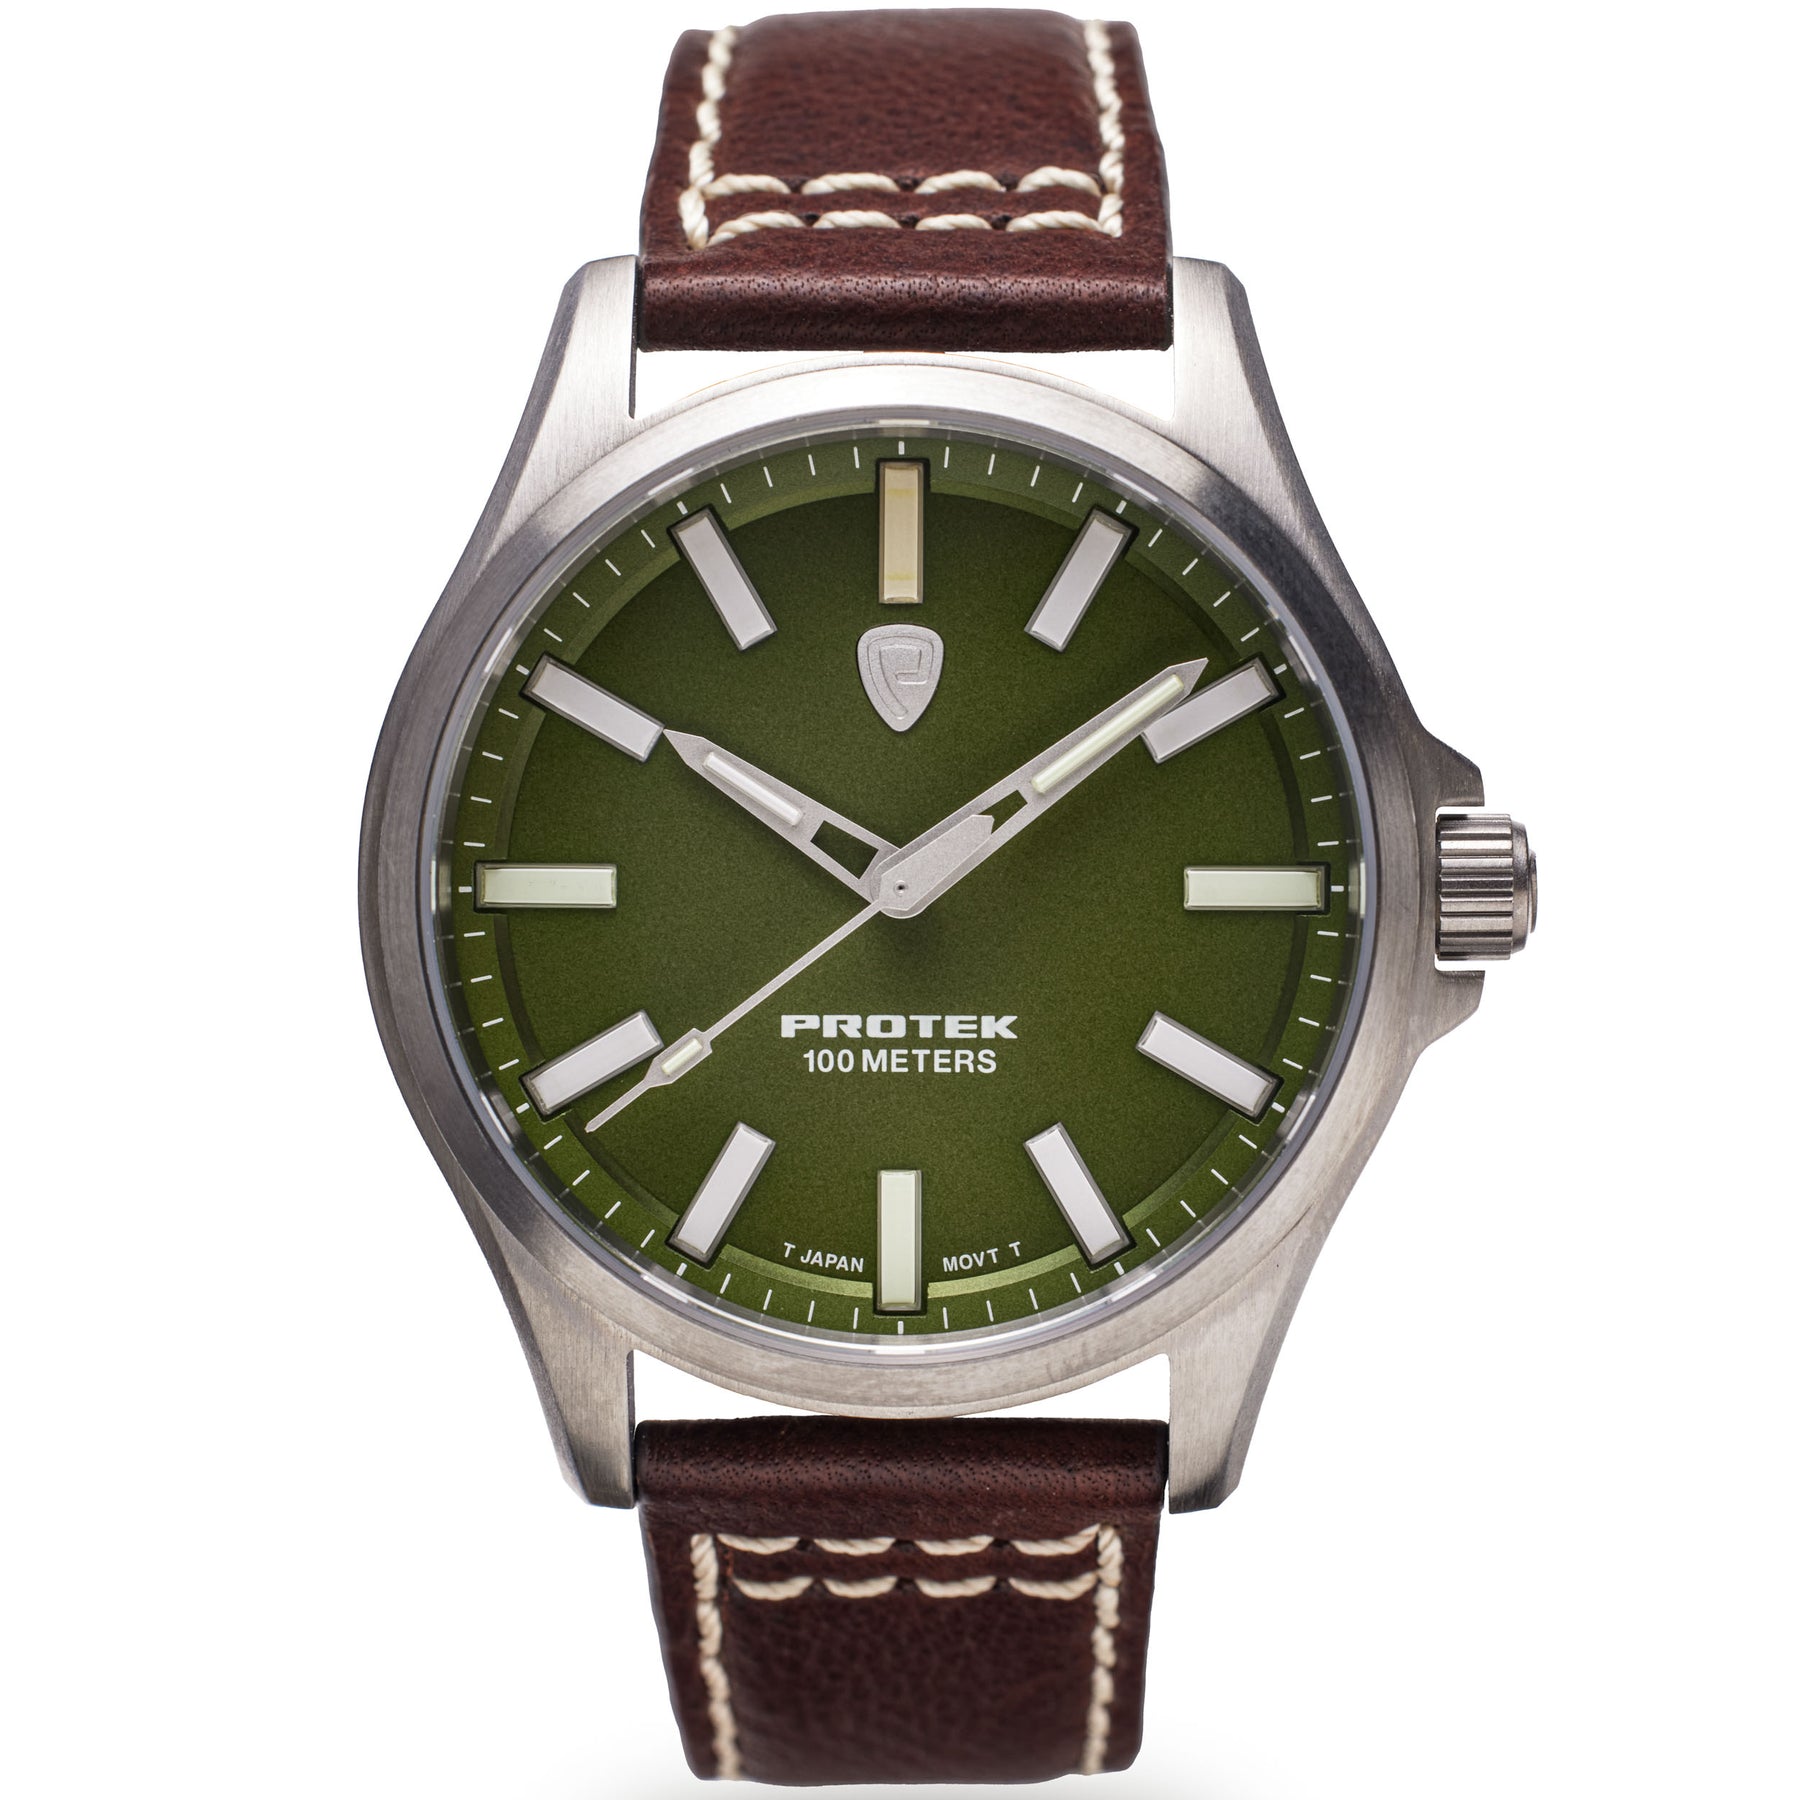 Titan Watches For Mens With Price Below 3000 - Buy Titan Watches For Mens  With Price Below 3000 online in India